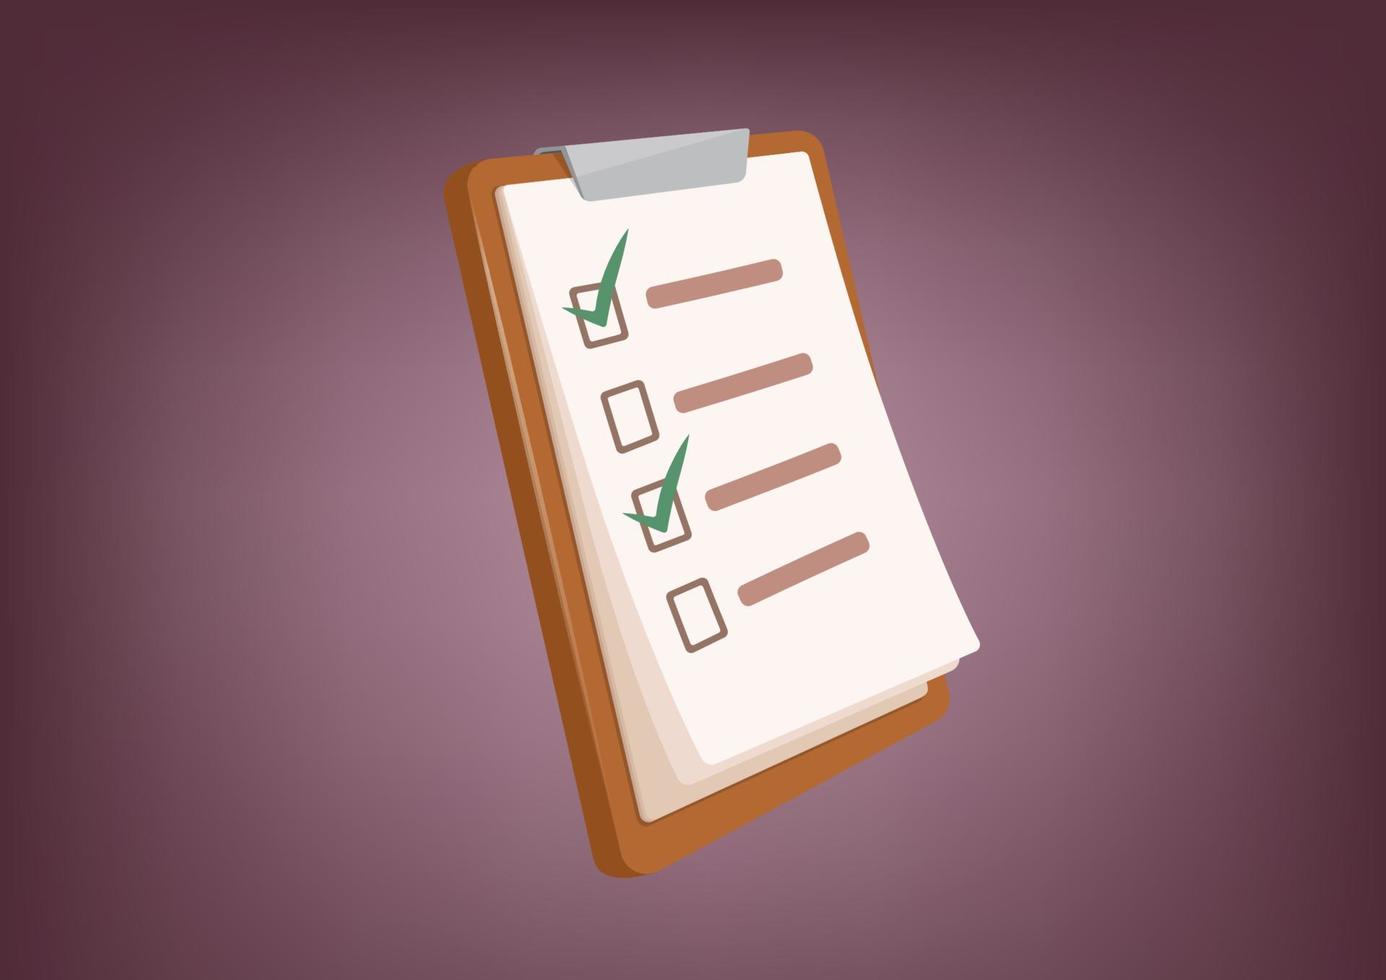 Checklist things to do on clipboard vector